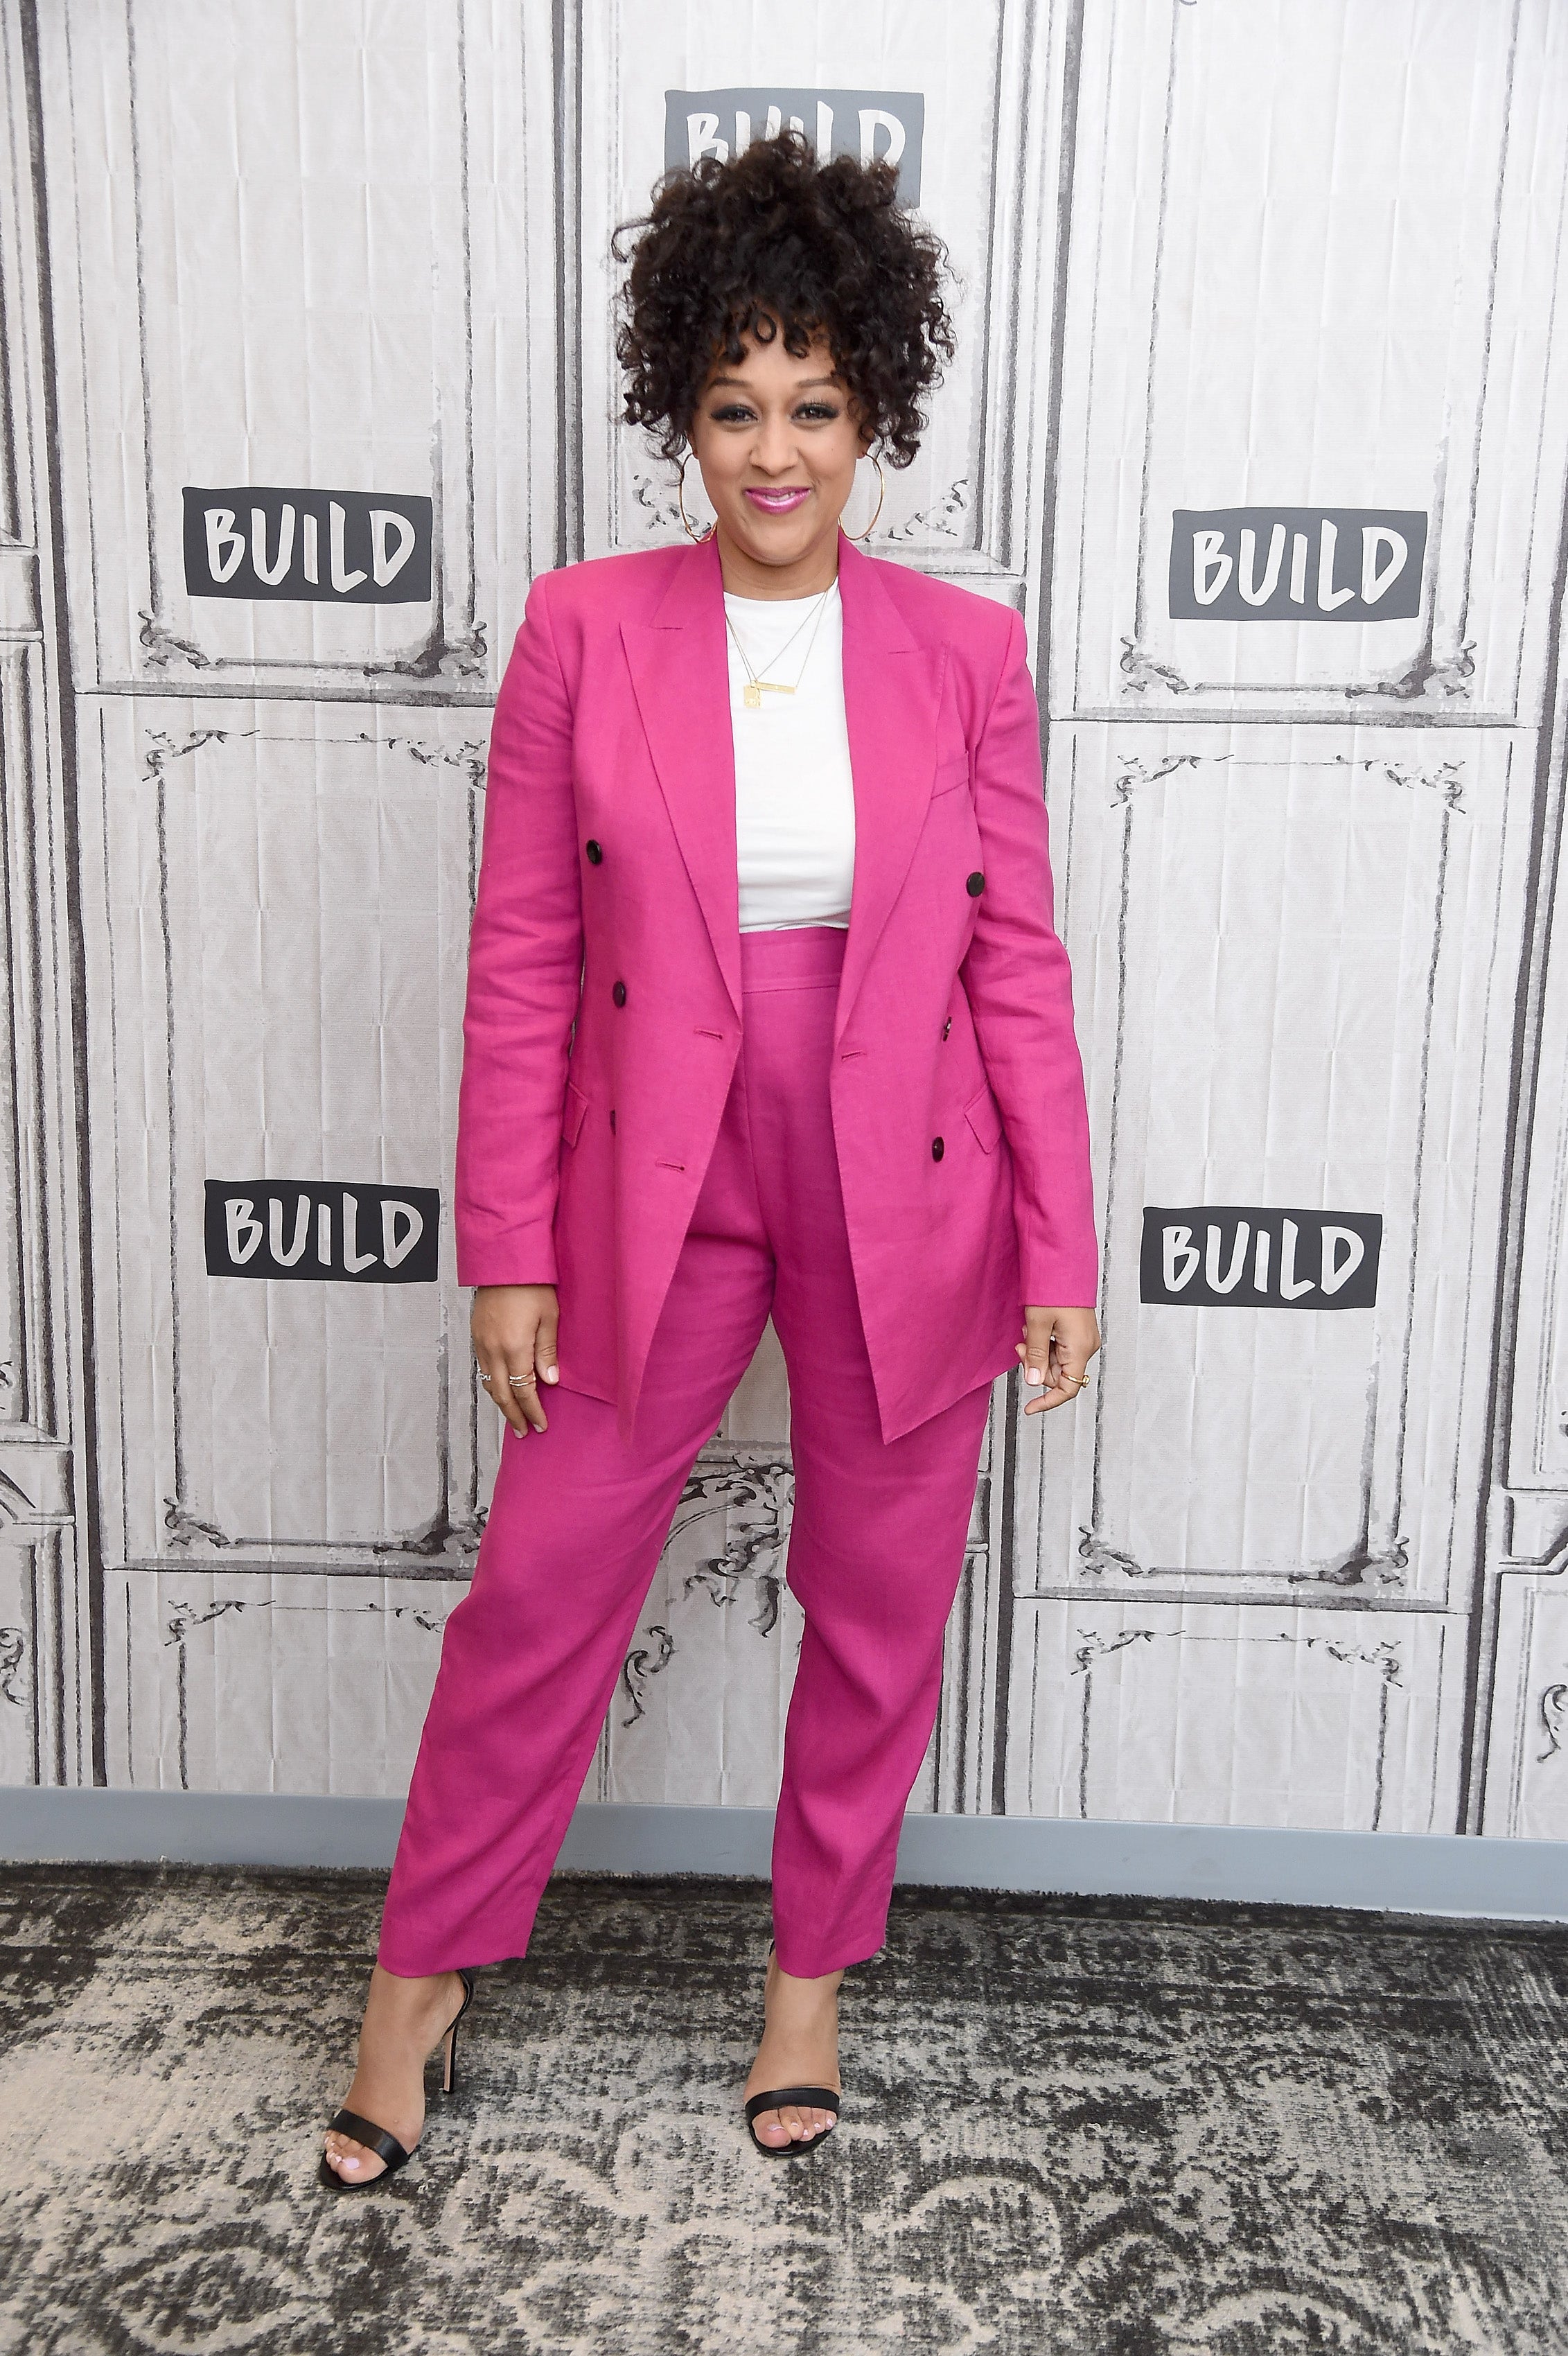 Janelle Monáe, Cardi B, Lala Anthony, And More Celebs Out And About